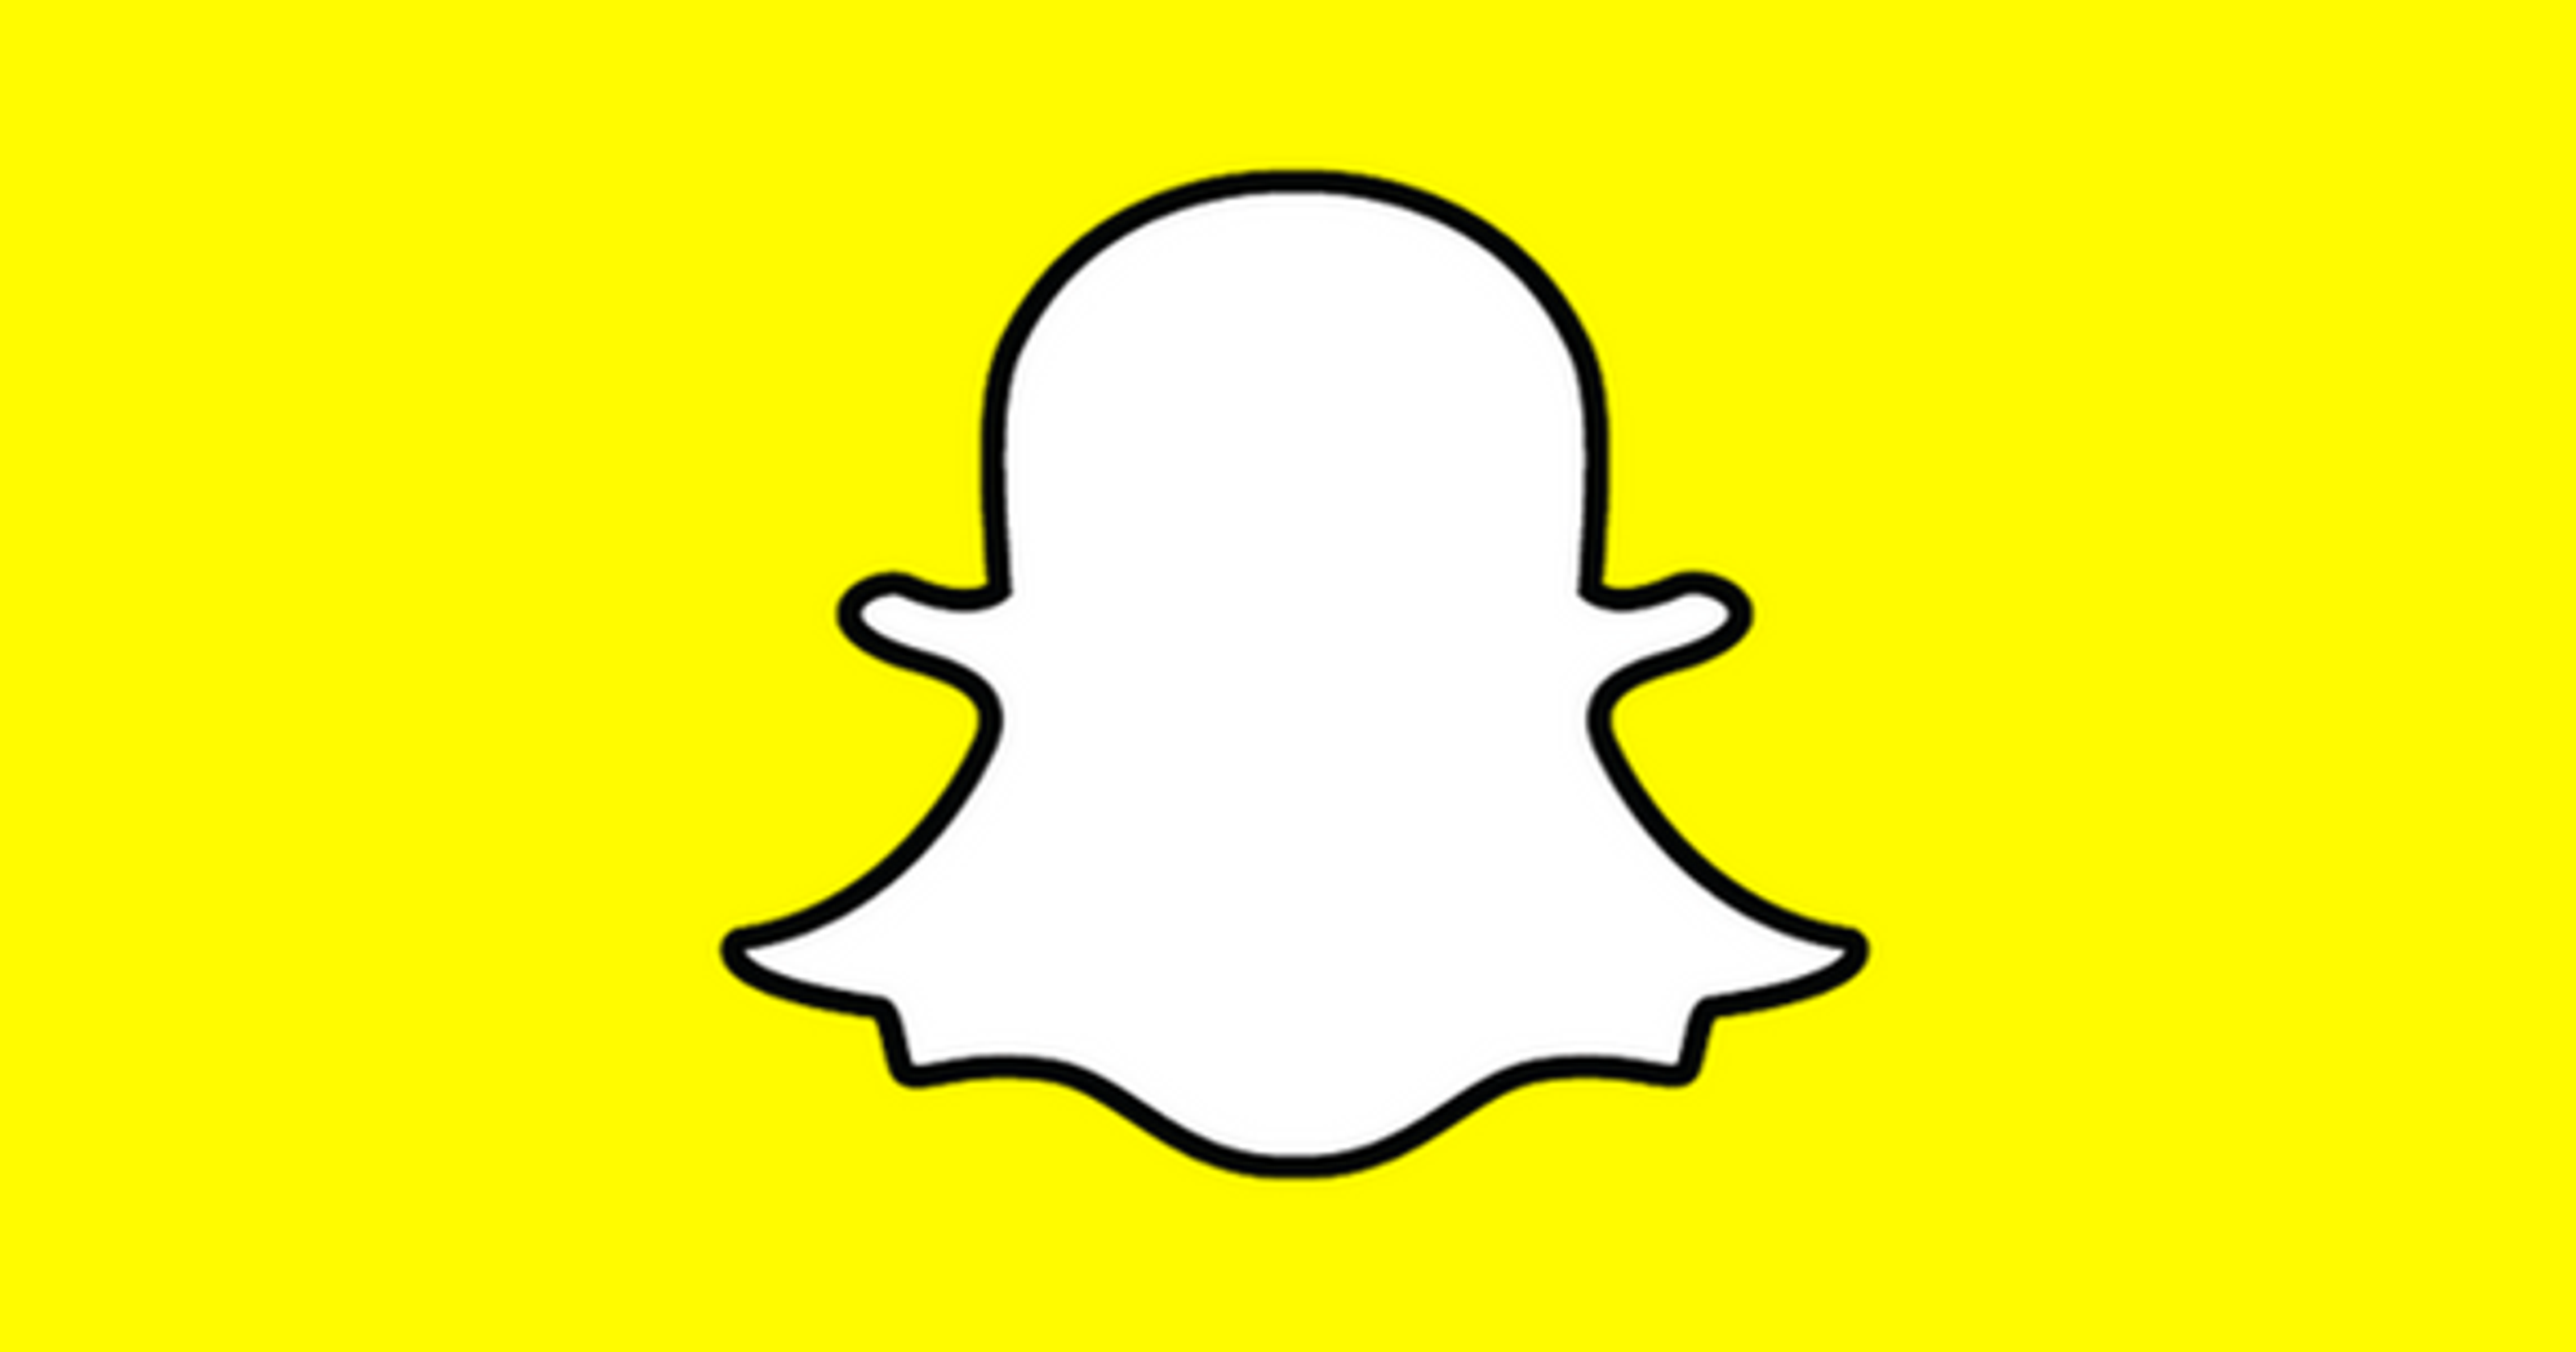 SweetIQ Announces Official Snapchat Partnership and API ...